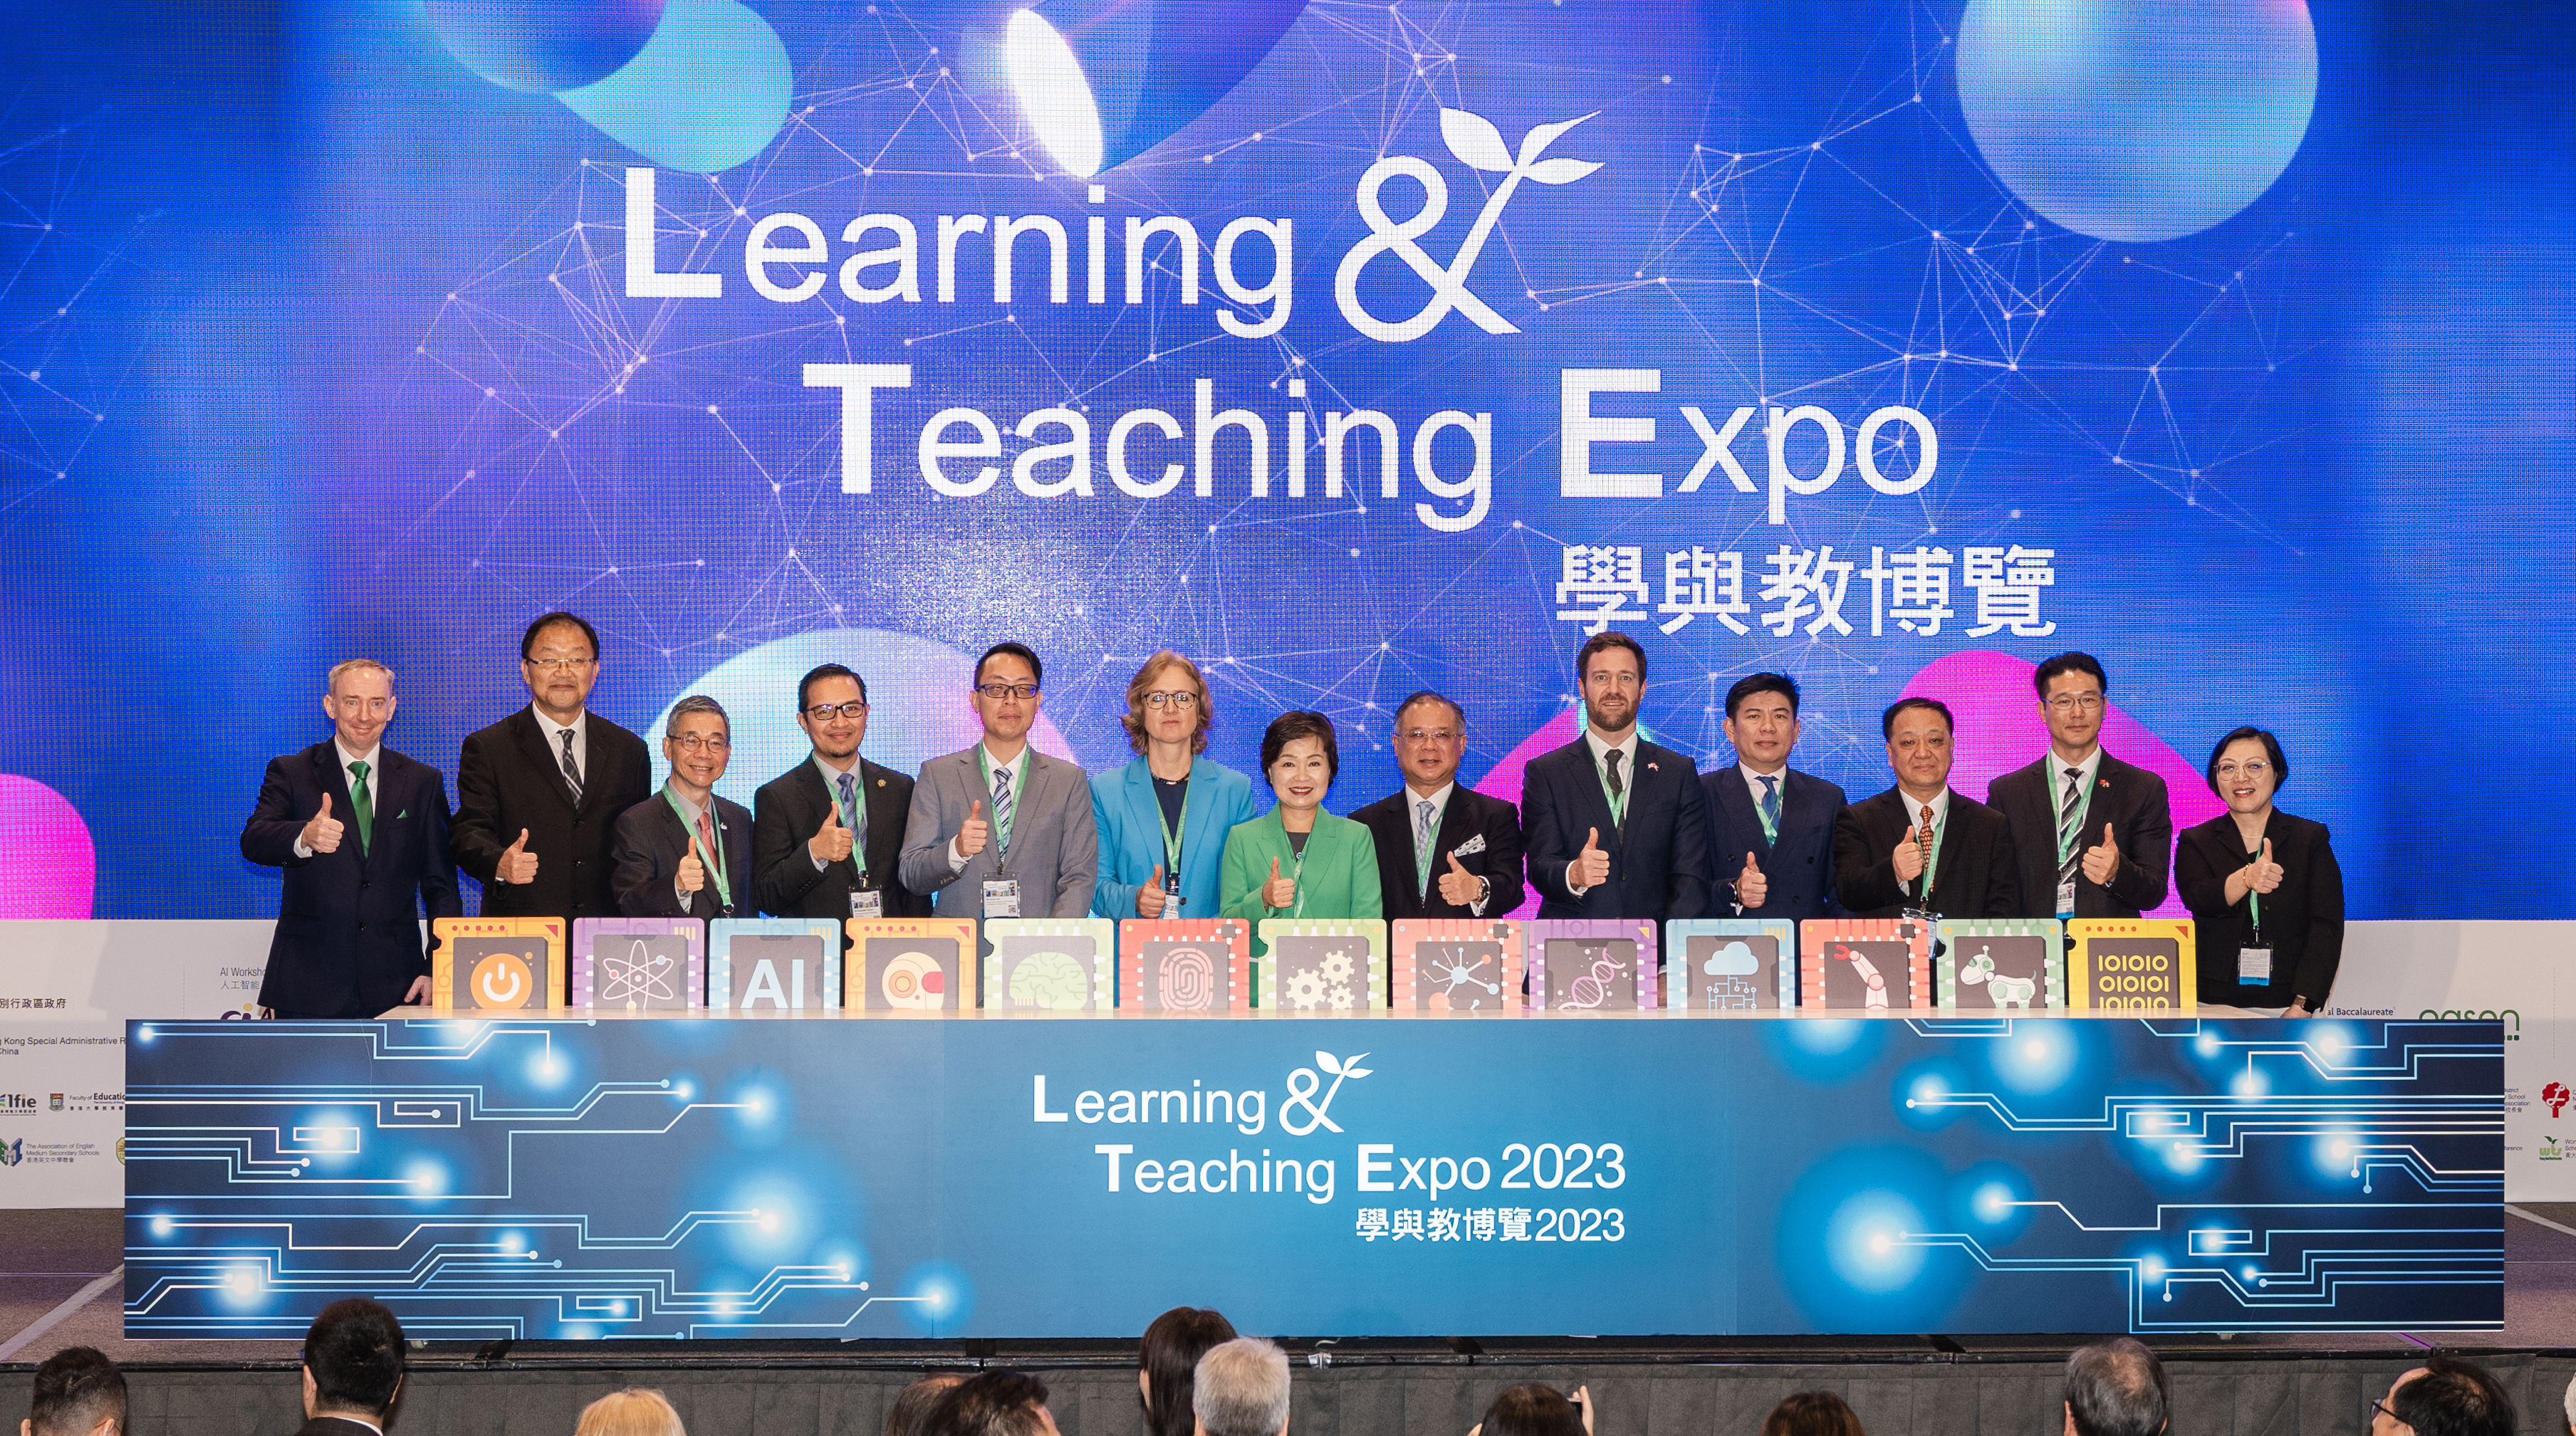 Dr Christine Choi Yuk Lin, JP, Secretary for Education, HKSAR, officiated the grand opening of the “Learning and Teaching Expo 2023”, alongside other distinguished guests.